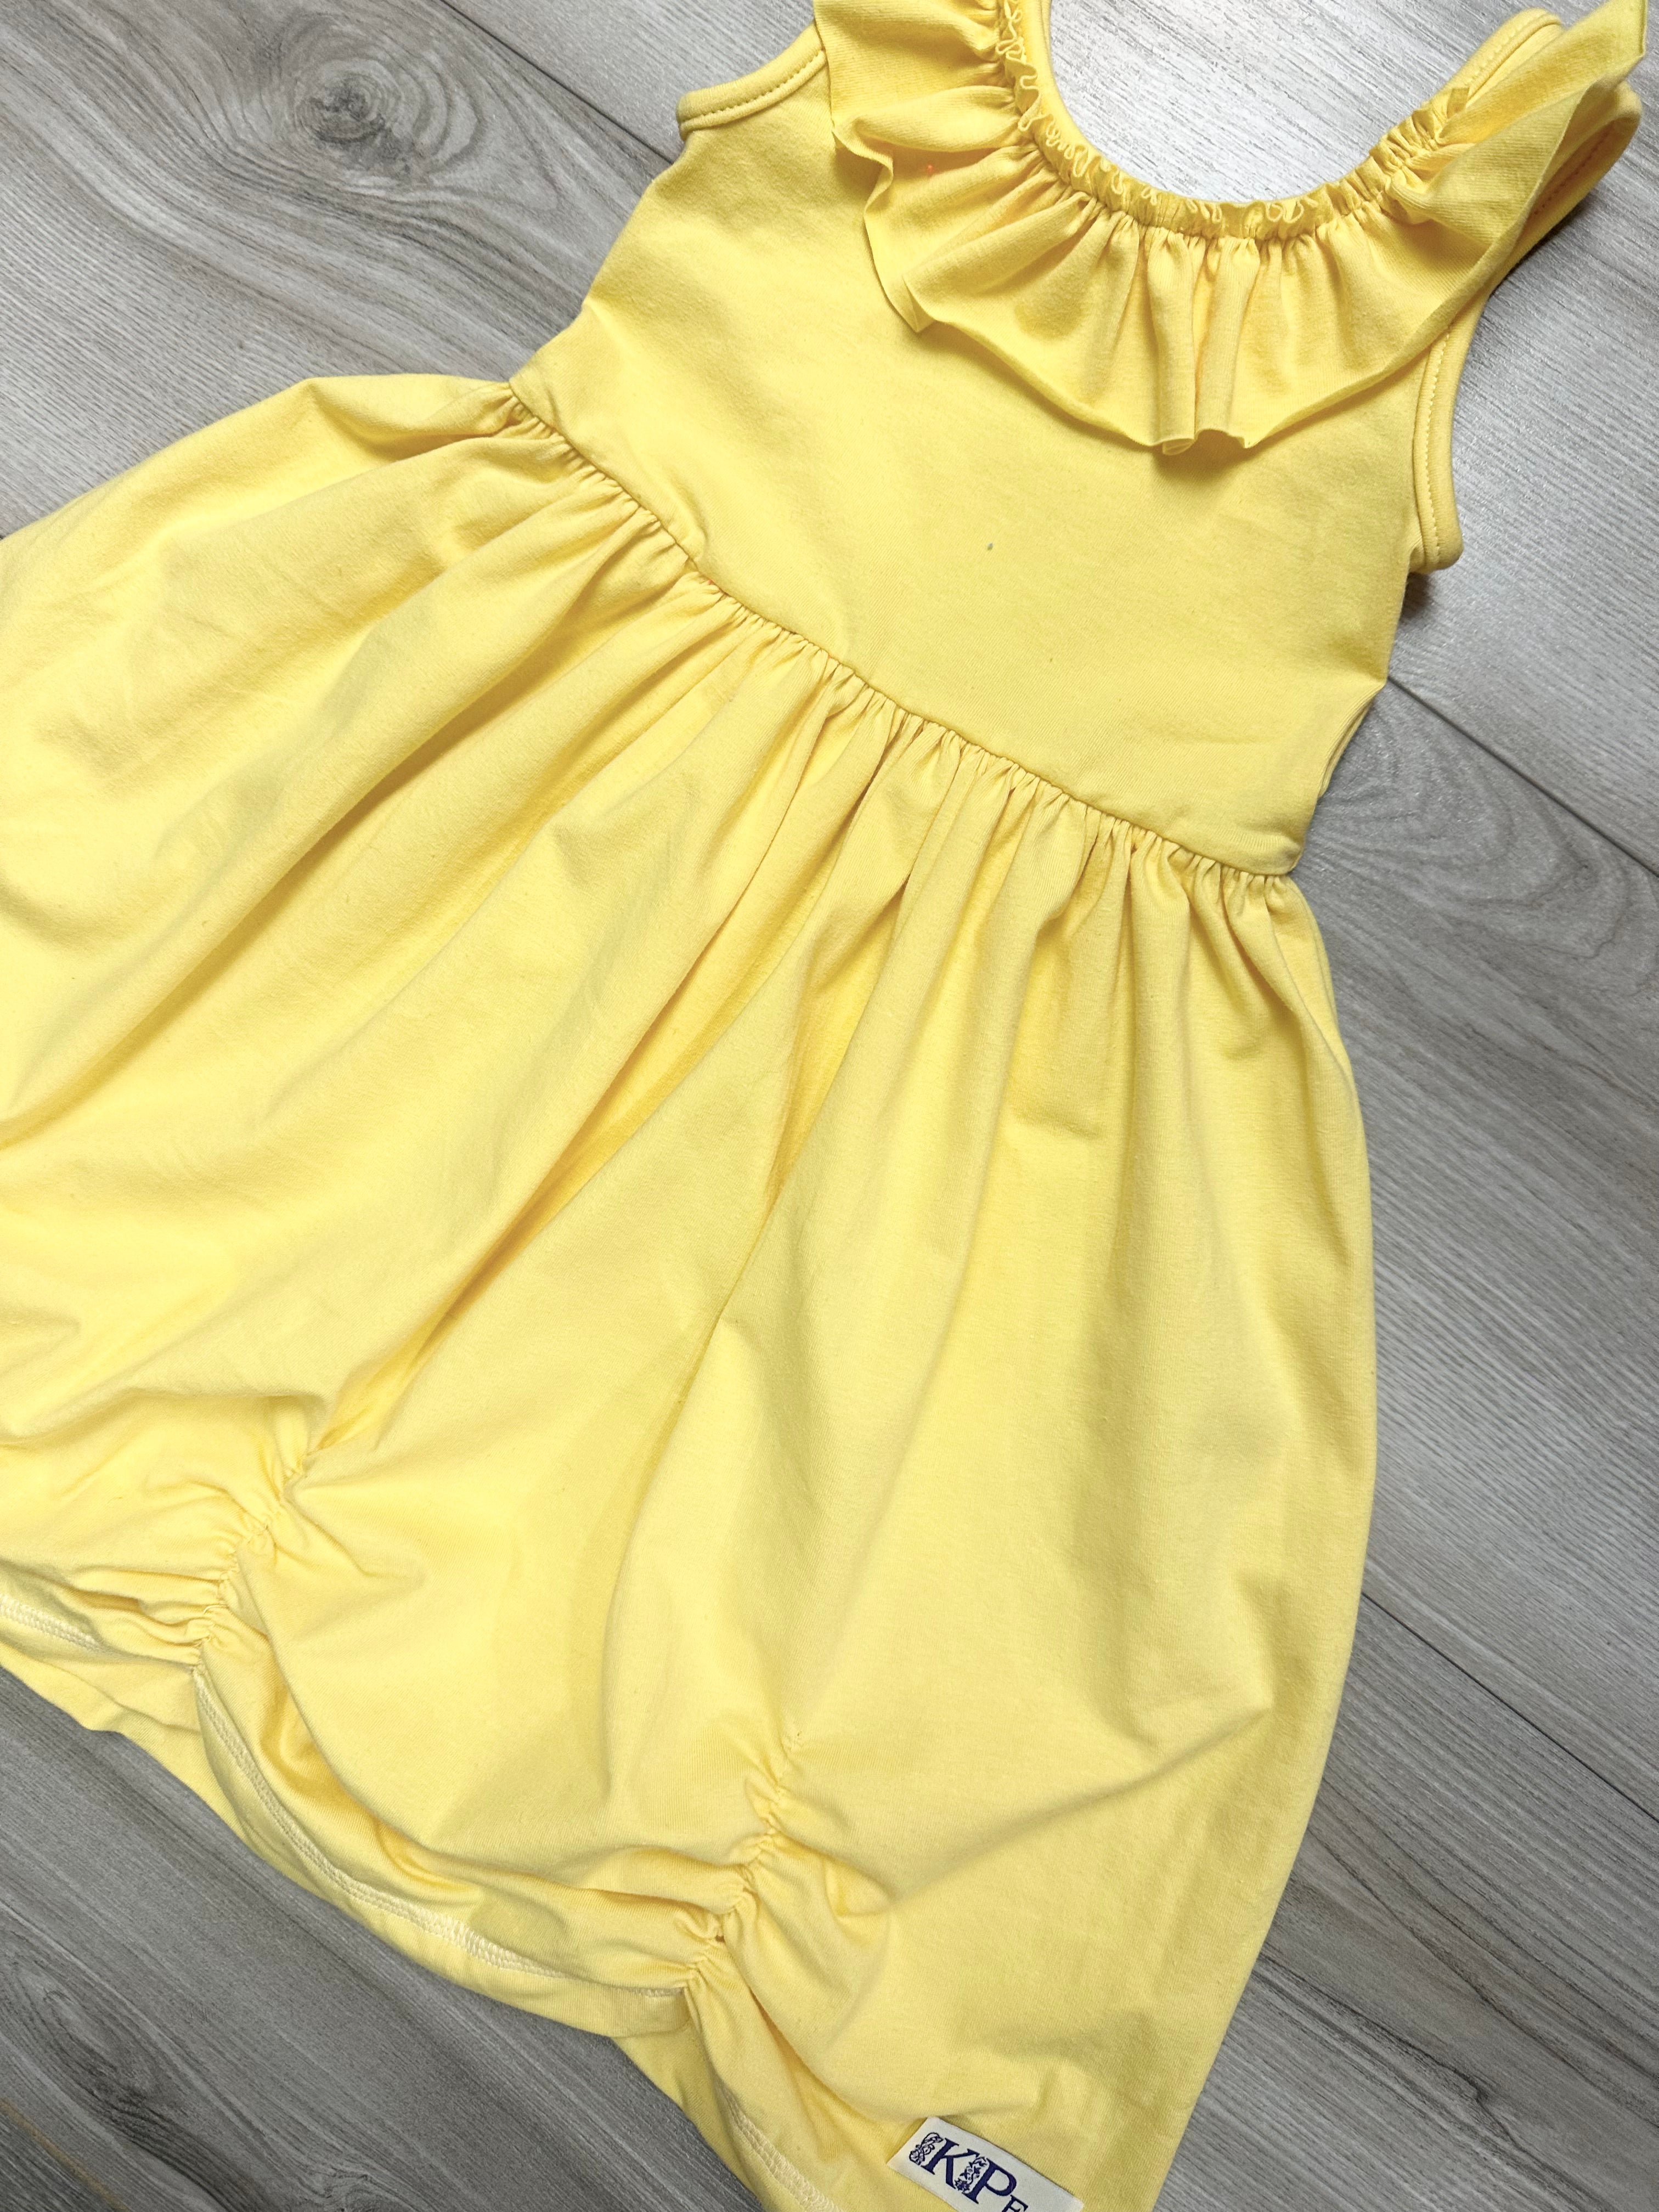 Belle Of The Ball Lap Dress (SHIPS IN 2 WEEKS)